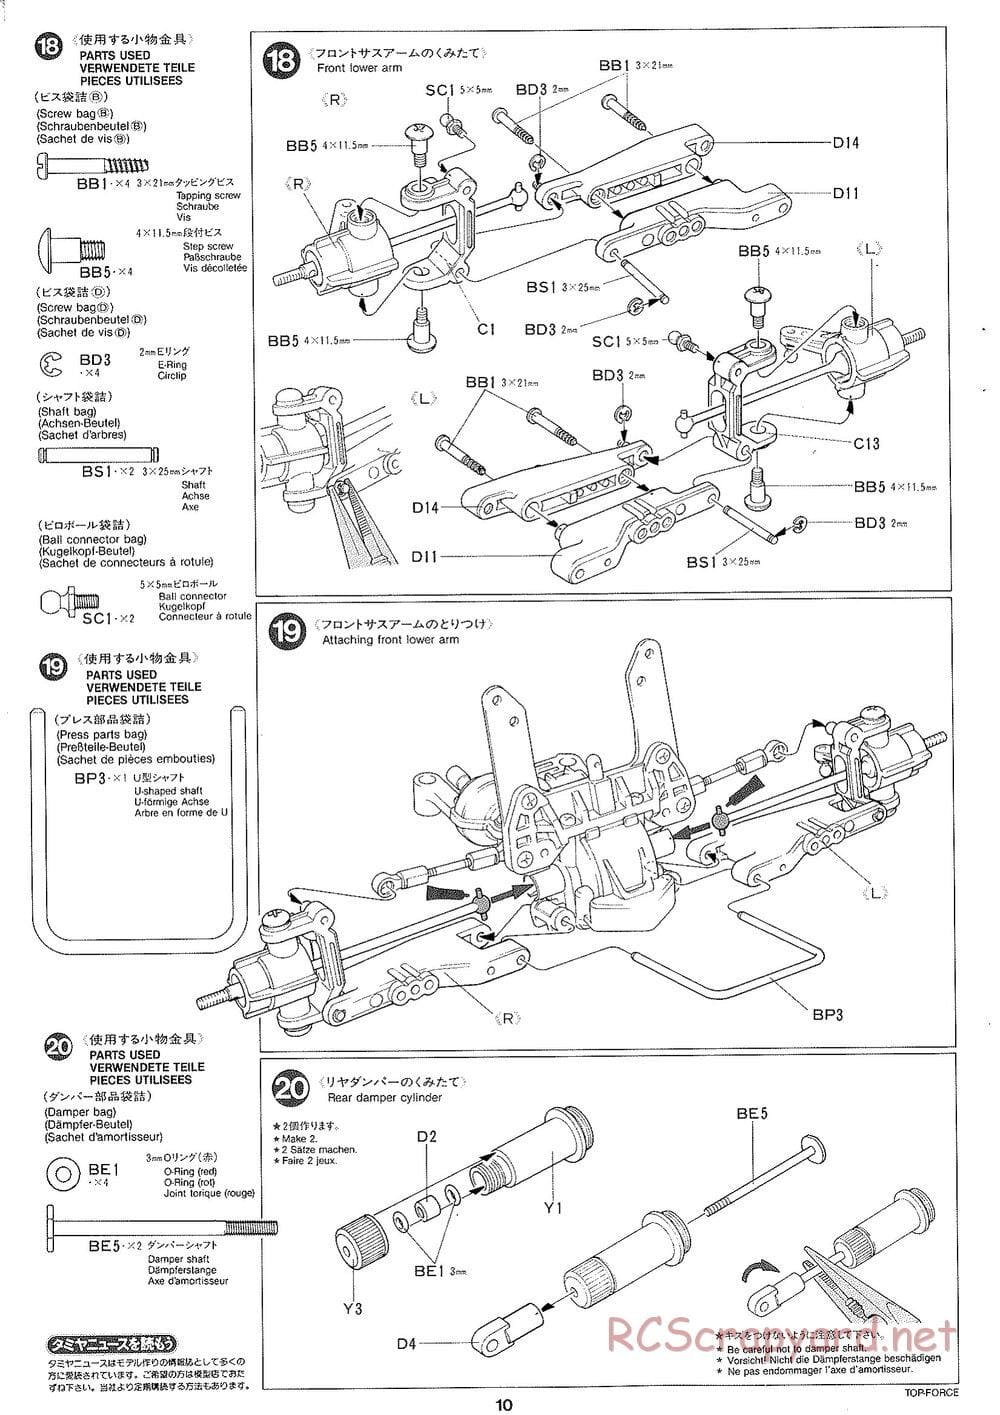 Tamiya - Top Force 2005 - DF-01 Chassis - Manual - Page 10